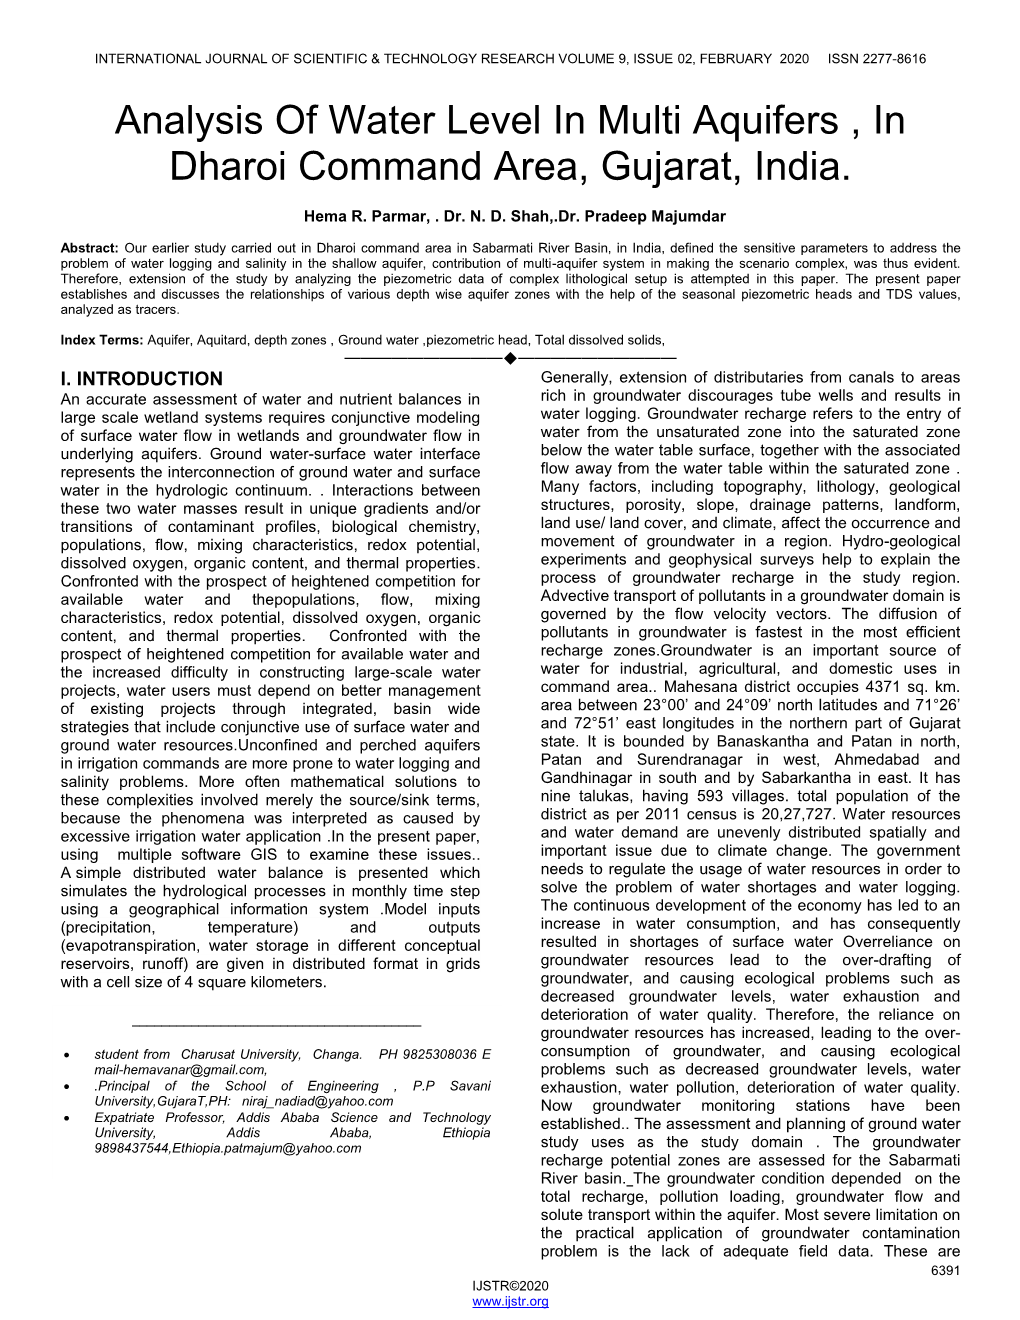 Analysis of Water Level in Multi Aquifers , in Dharoi Command Area, Gujarat, India